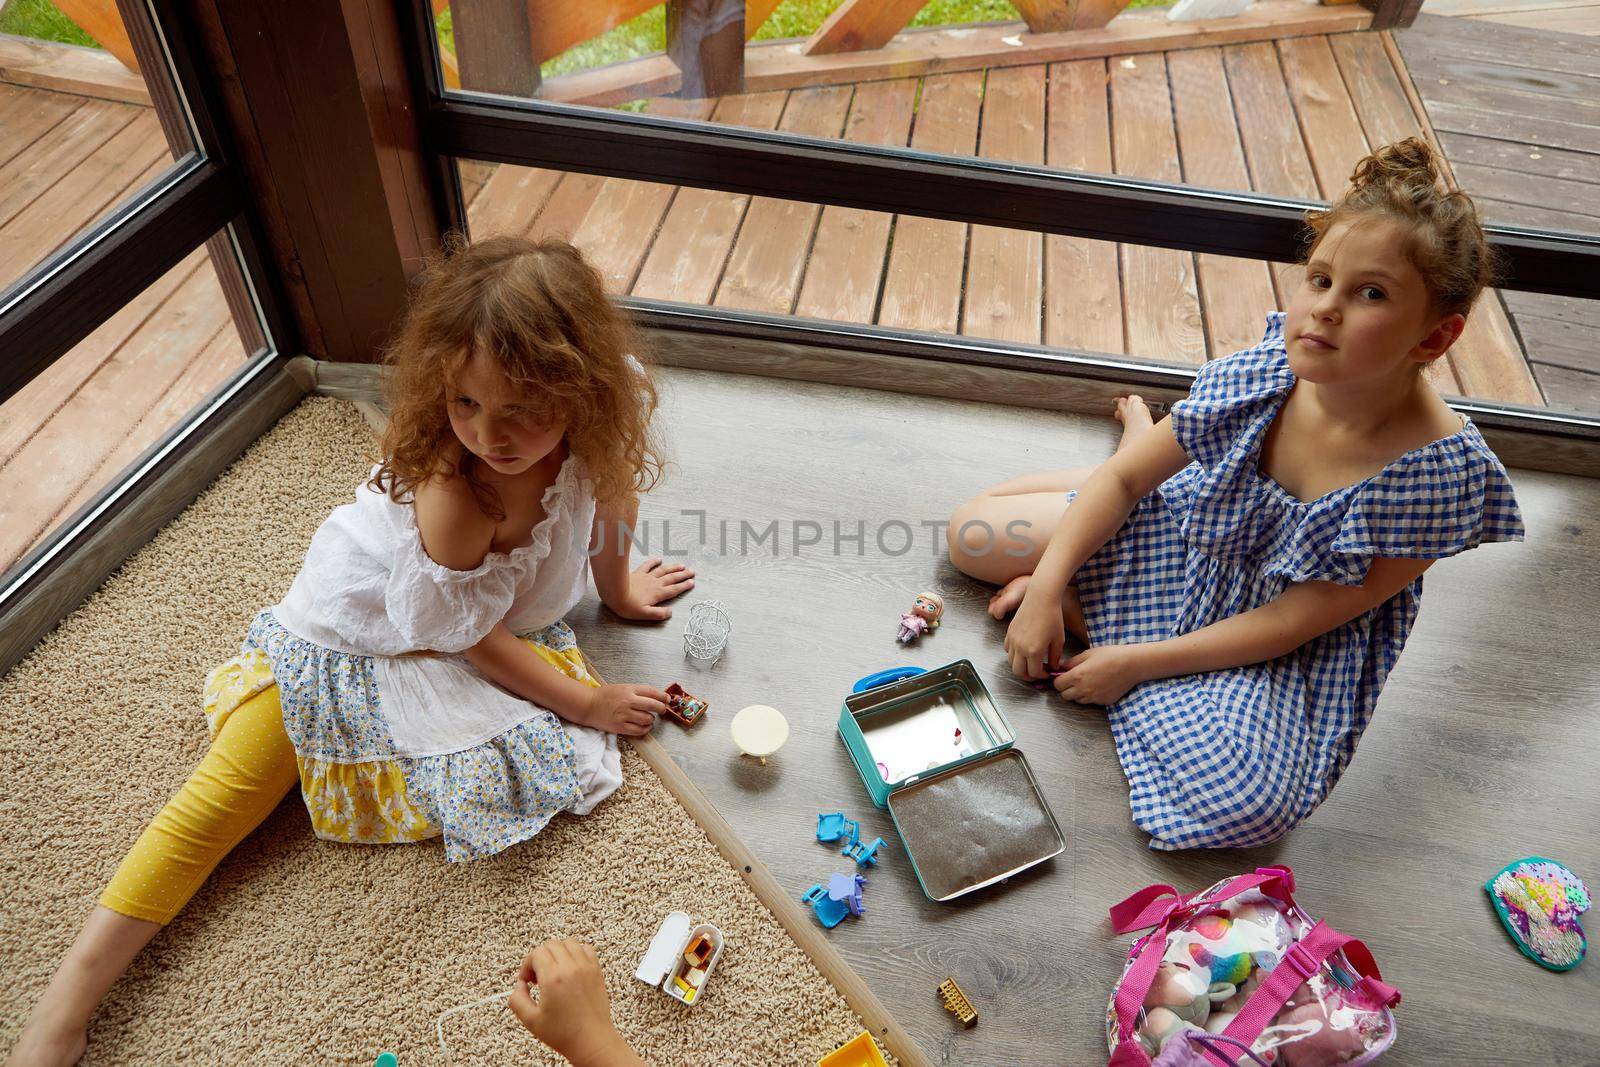 Girls playing on floor near window at home by Demkat